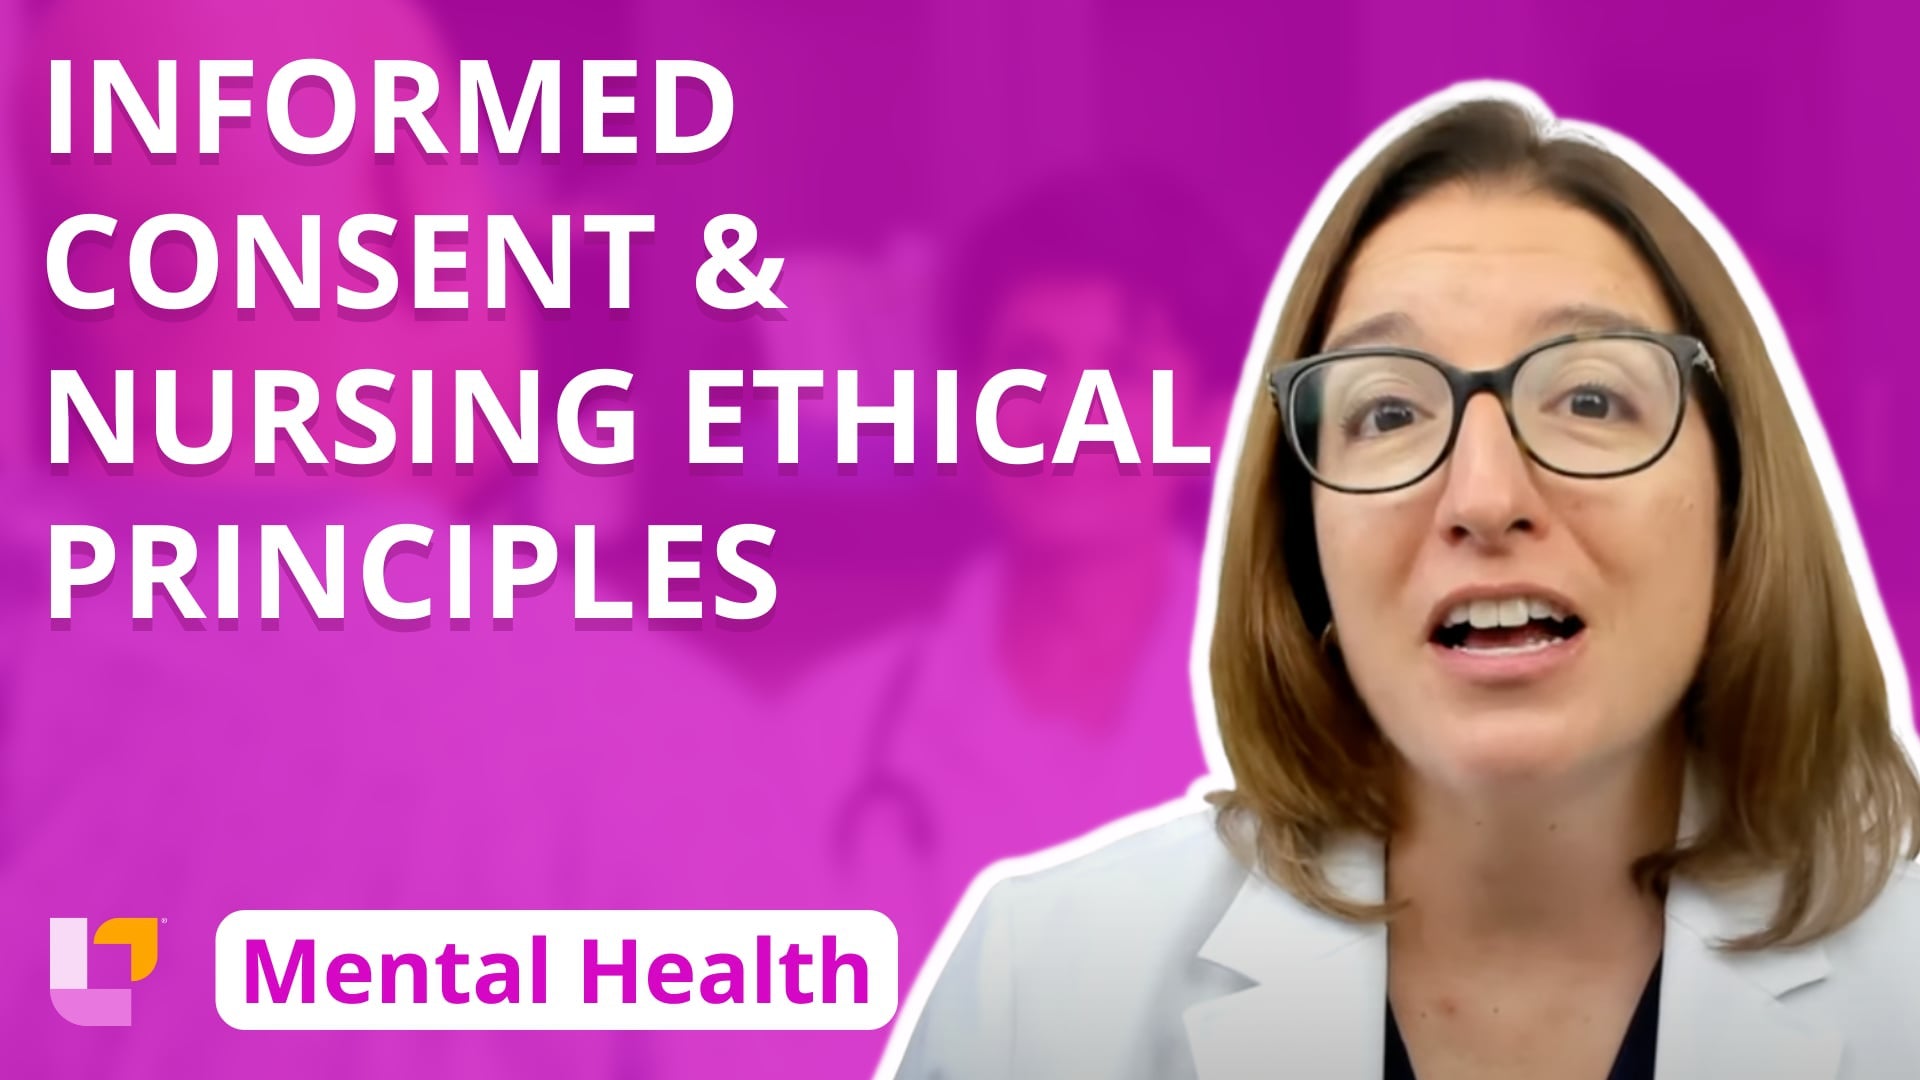 Psychiatric Mental Health, part 2: Informed Consent, Ethical Principles - LevelUpRN